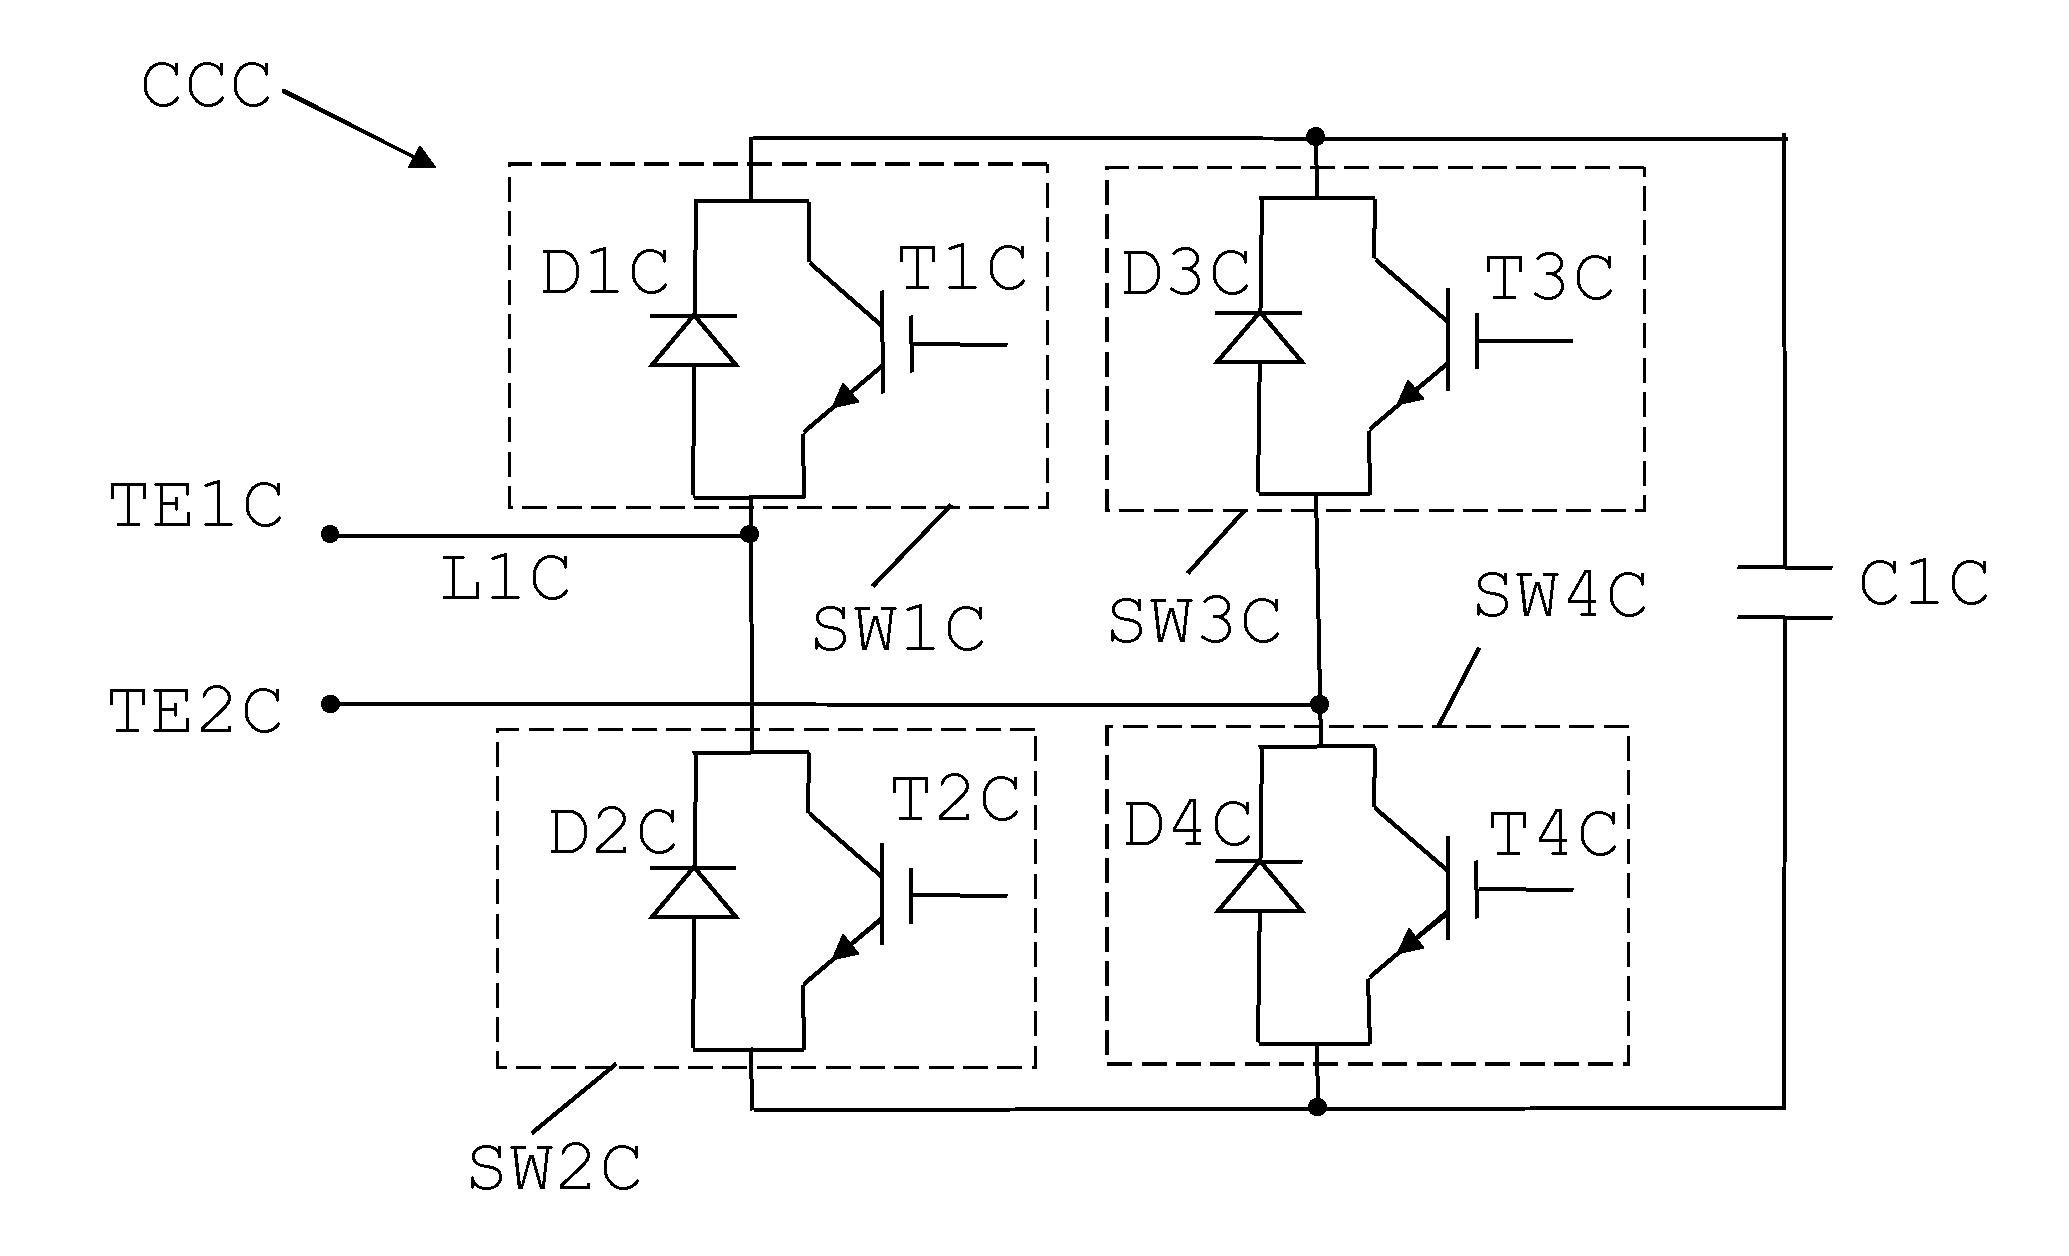 Multilevel converter with cells being selected based on phase arm current